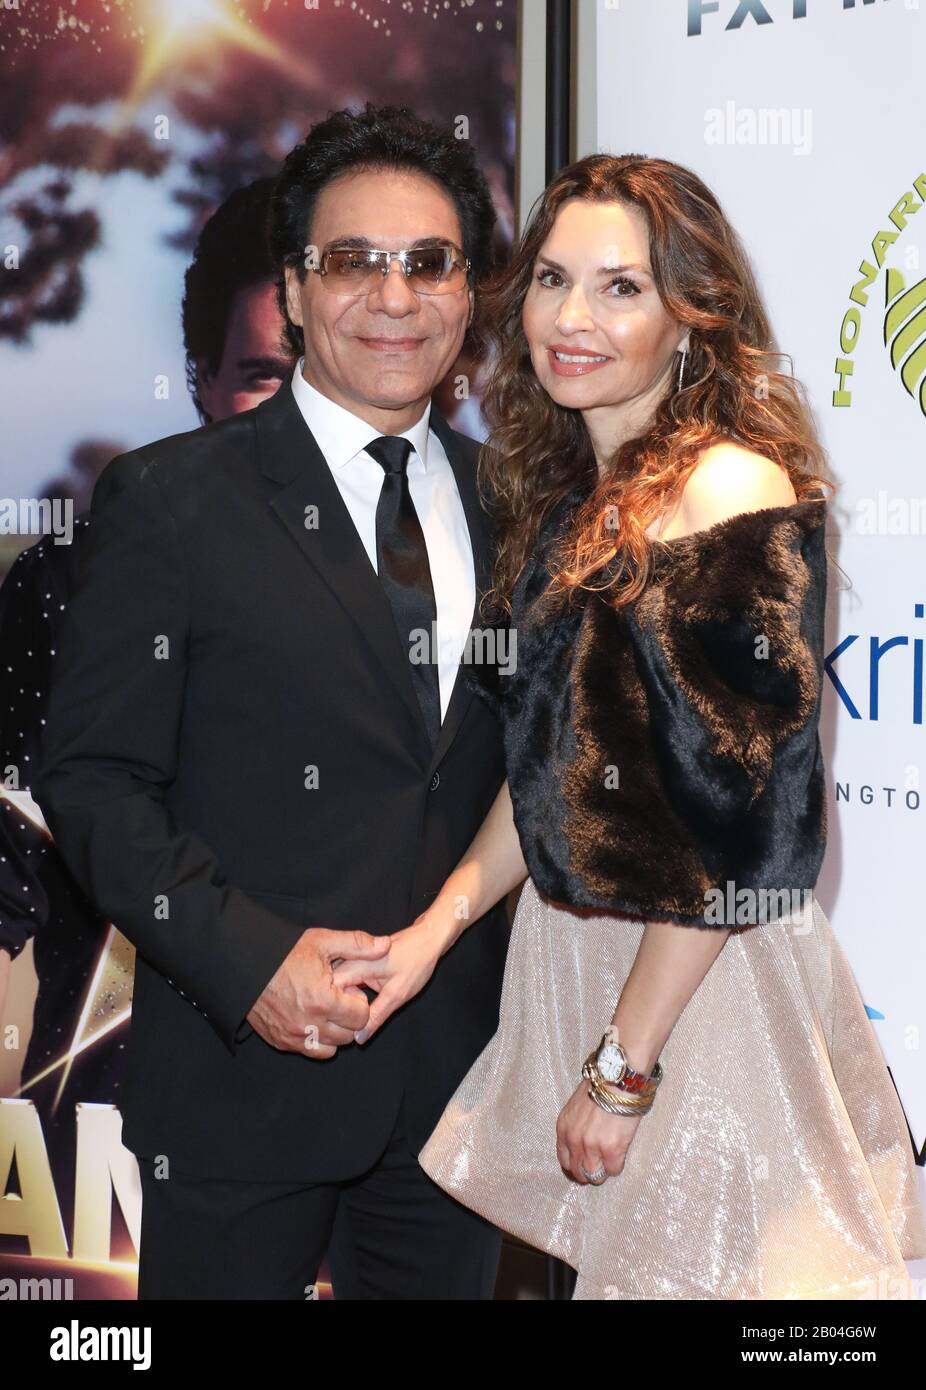 Andy Madadian Walk of Fame Star After Party at the Hollywood Museum in Hollywood, California on January 17, 2020 Featuring: Andy Madadian, Shani Rigsbee Where: Hollywood, California, United States When: 17 Jan 2020 Credit: Sheri Determan/WENN.com Stock Photo